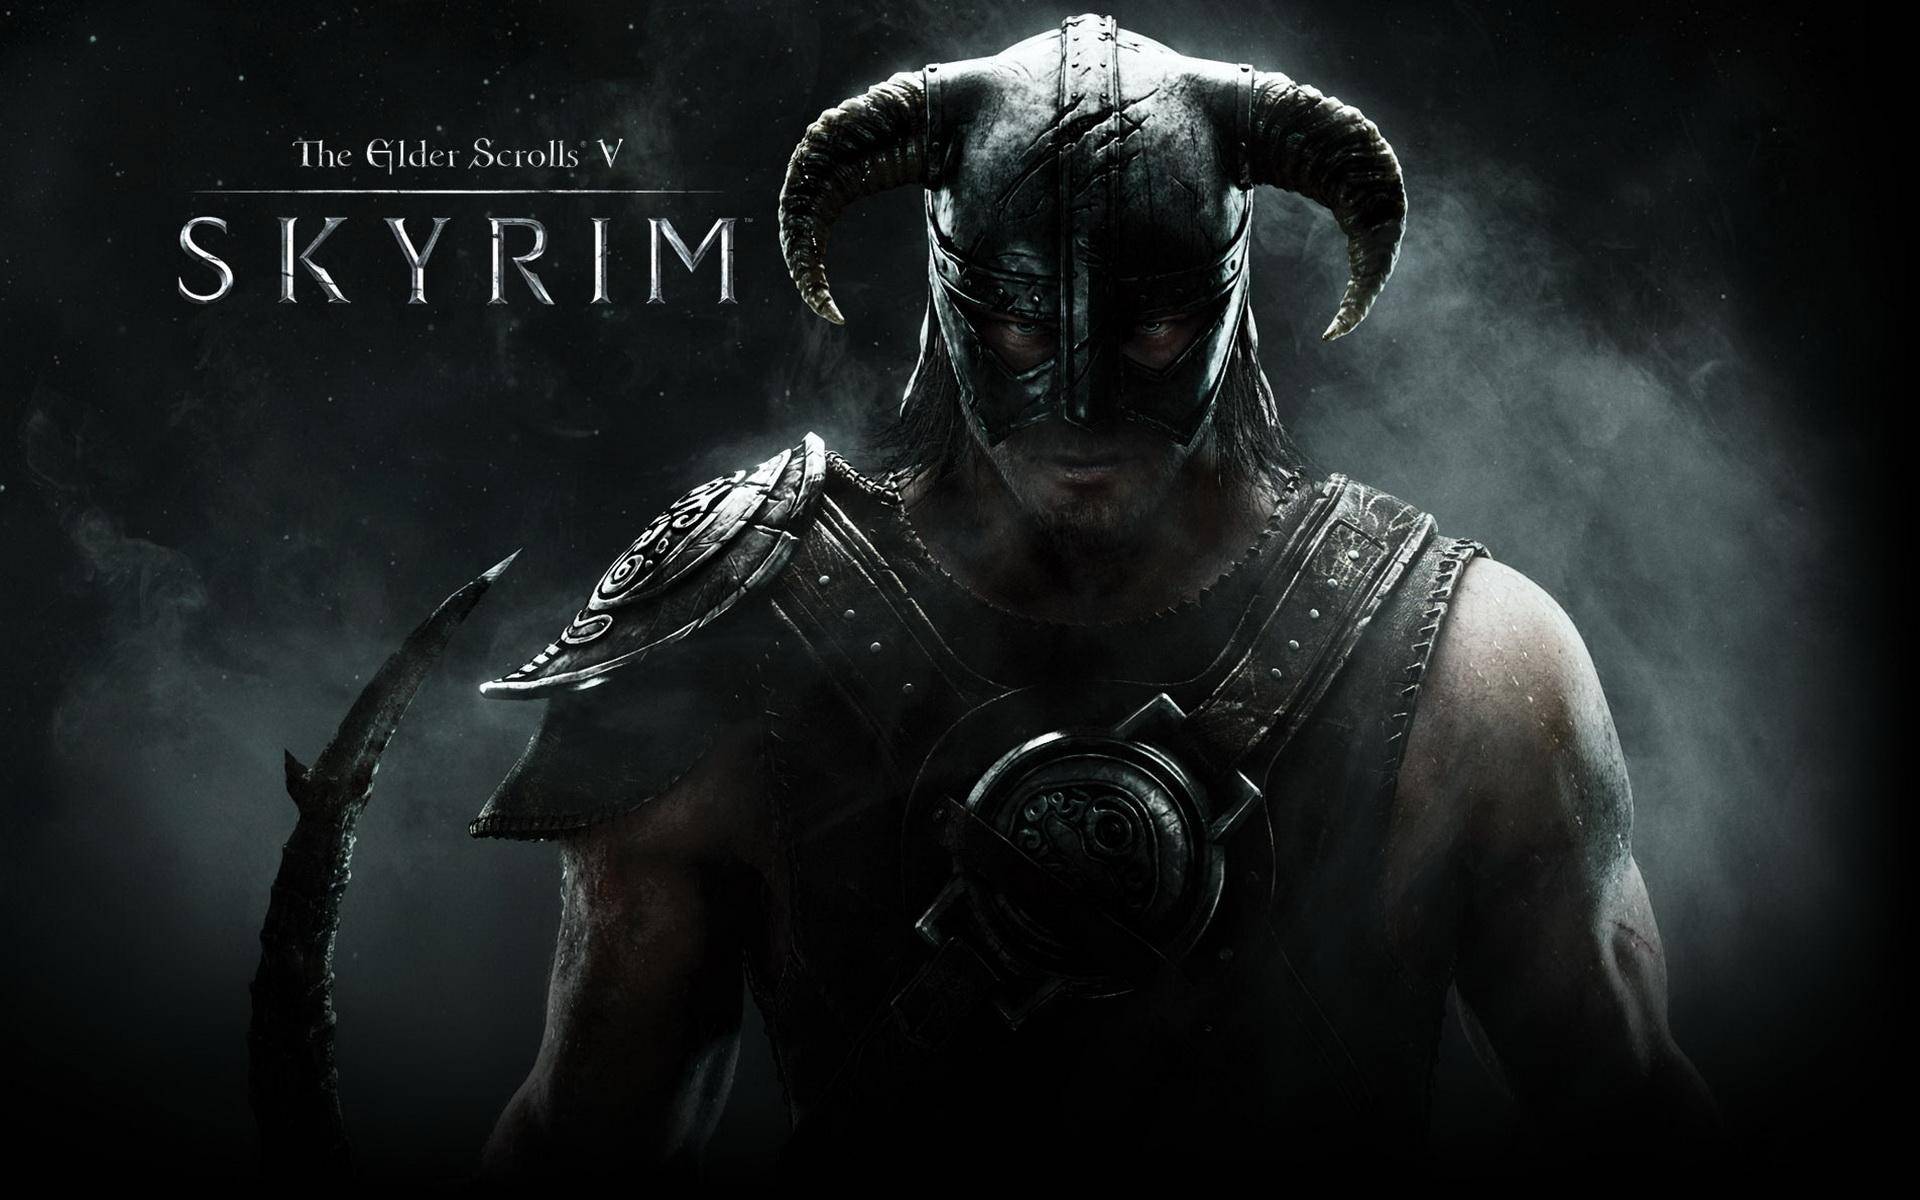 Skyrim remastered gets a launch date